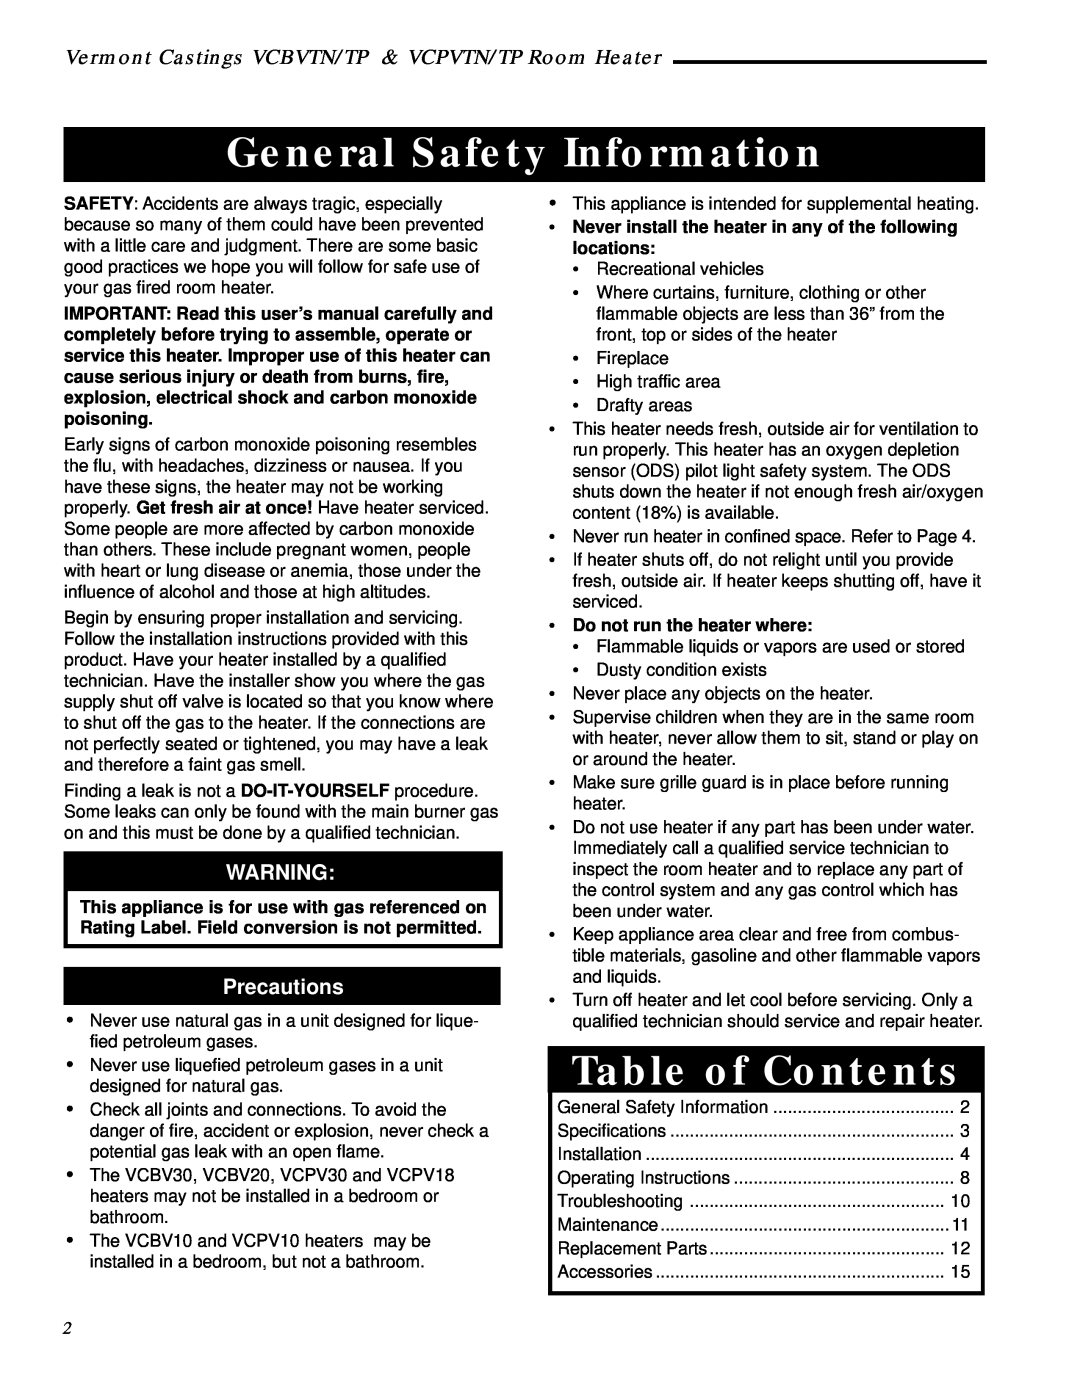 Vermont Casting VCPV18TN, VCPV10TN, VCPV30TP - 30, VCBV20TN General Safety Information, Table of Contents, Precautions 